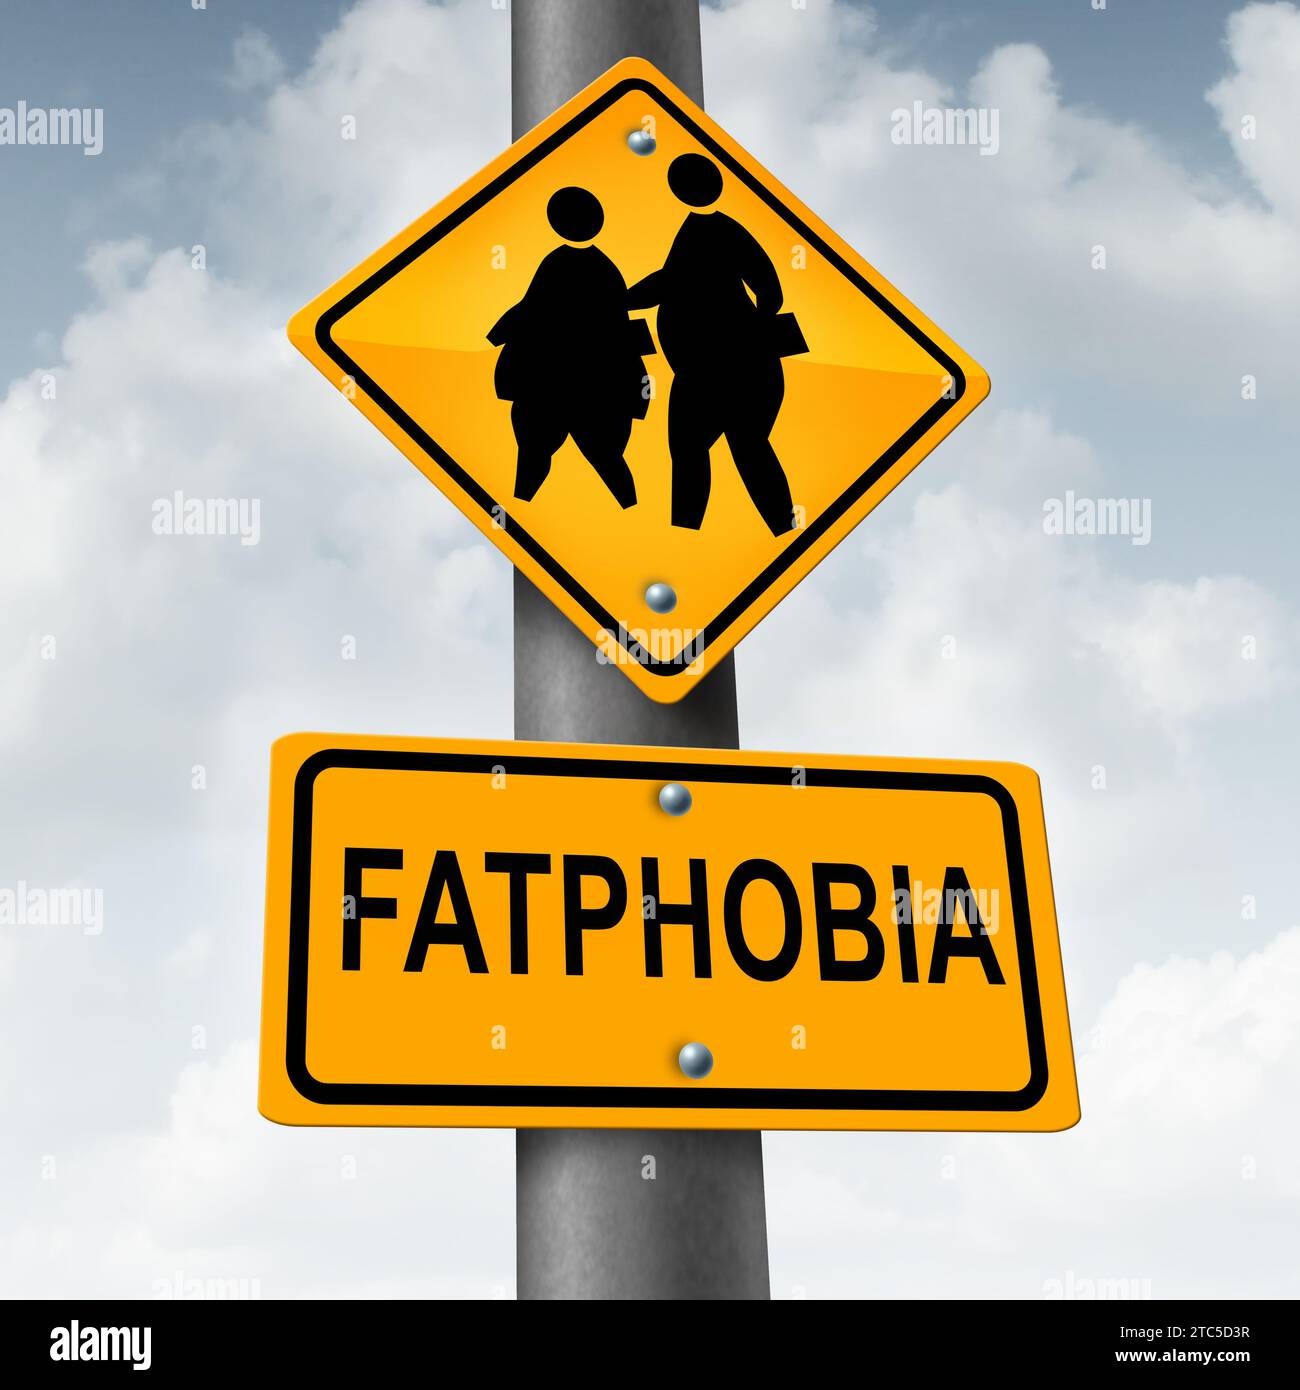 Fatphobia or Fat Phobia awareness as a social stigma of obesity and fear of fatness or overweight people and anti-fat psychology and weight bias Stock Photo